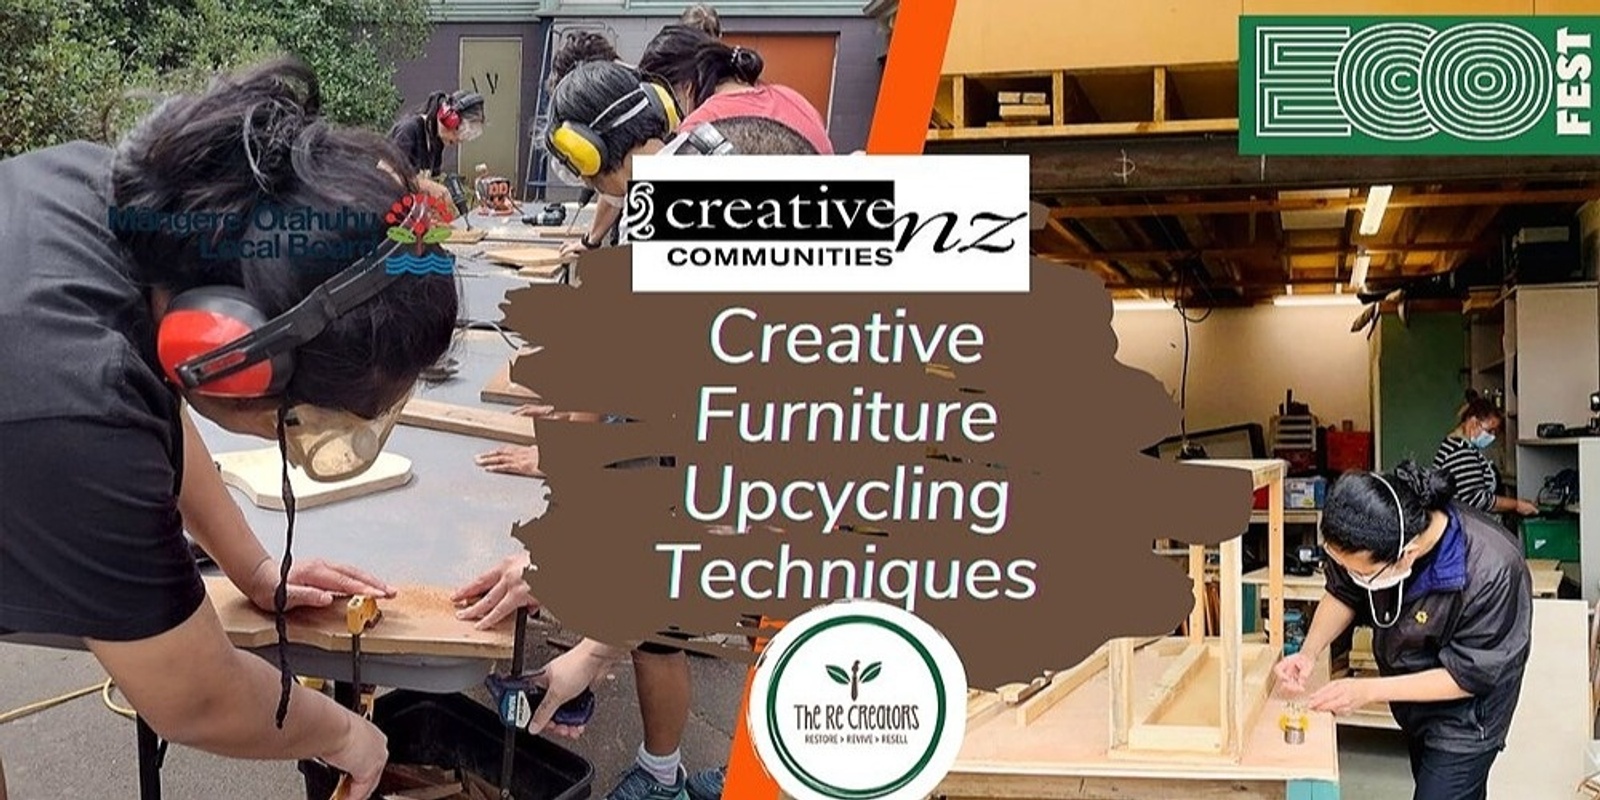 Banner image for Eco Fest - Creative Furniture Upcycling Techniques, Beautification Trust, Wednesday 29 March 11am - 2pm